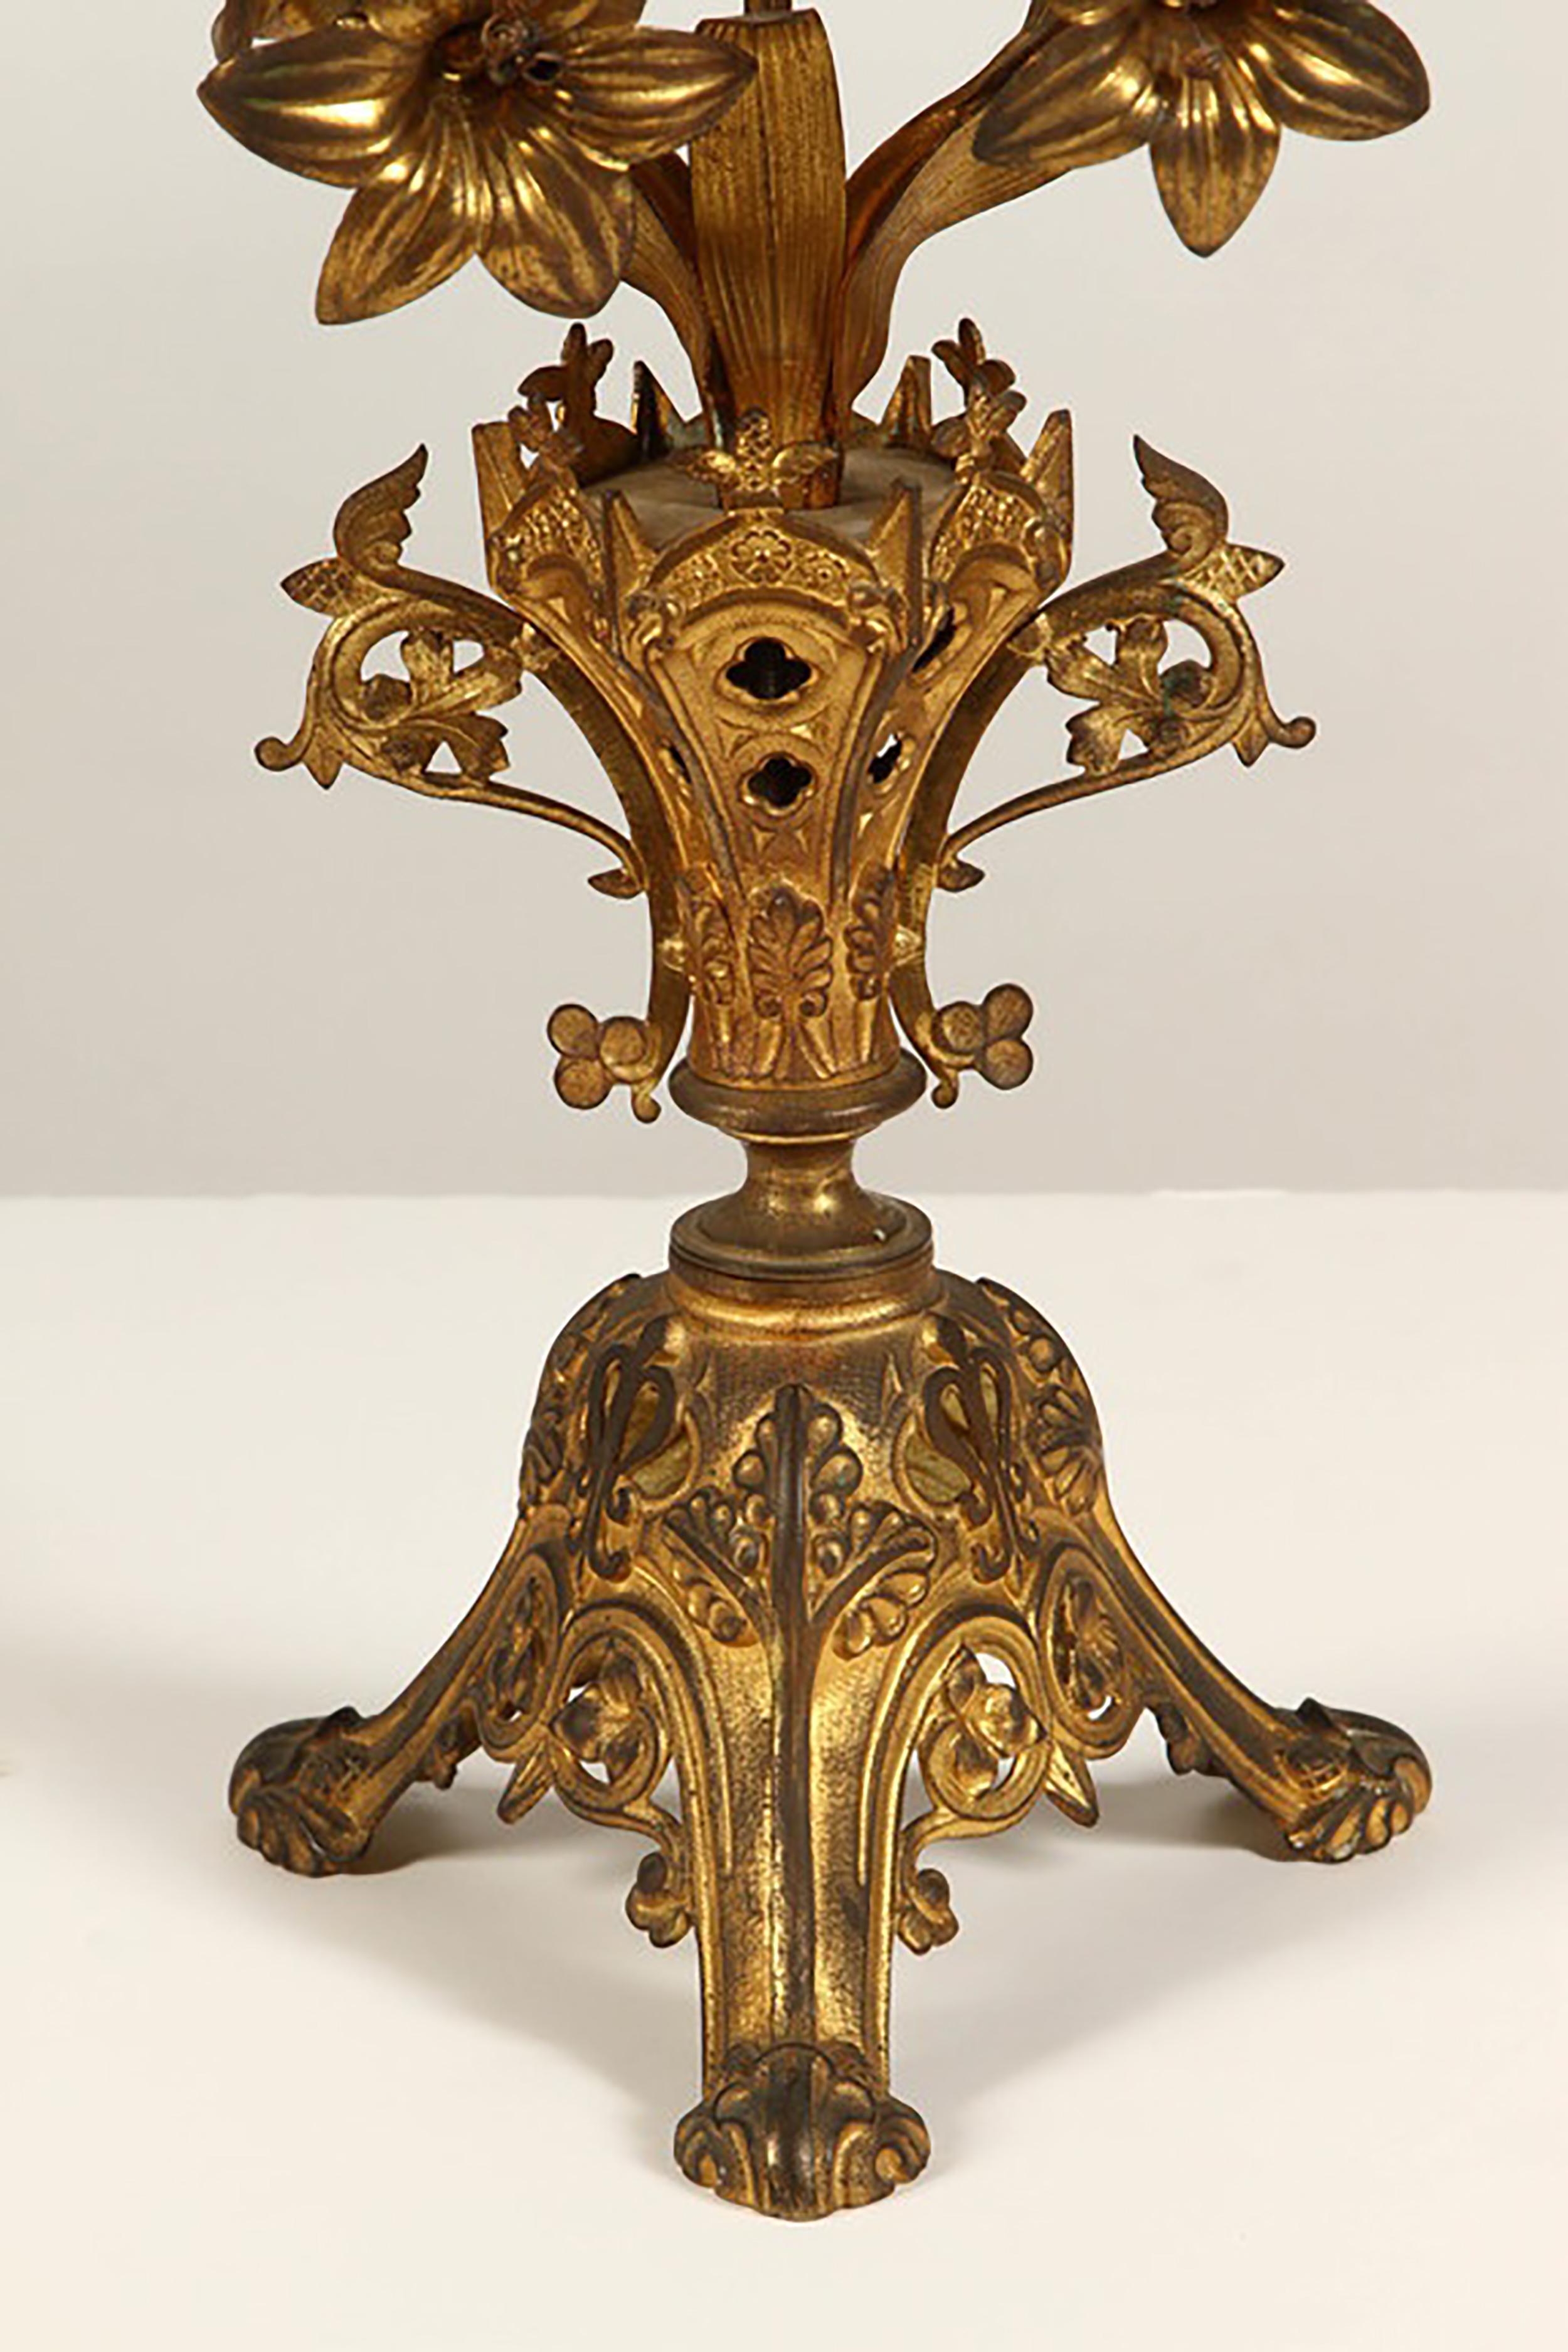 Pair of 19th Century French Gilt-Metal Candelabra In Good Condition For Sale In Pasadena, CA